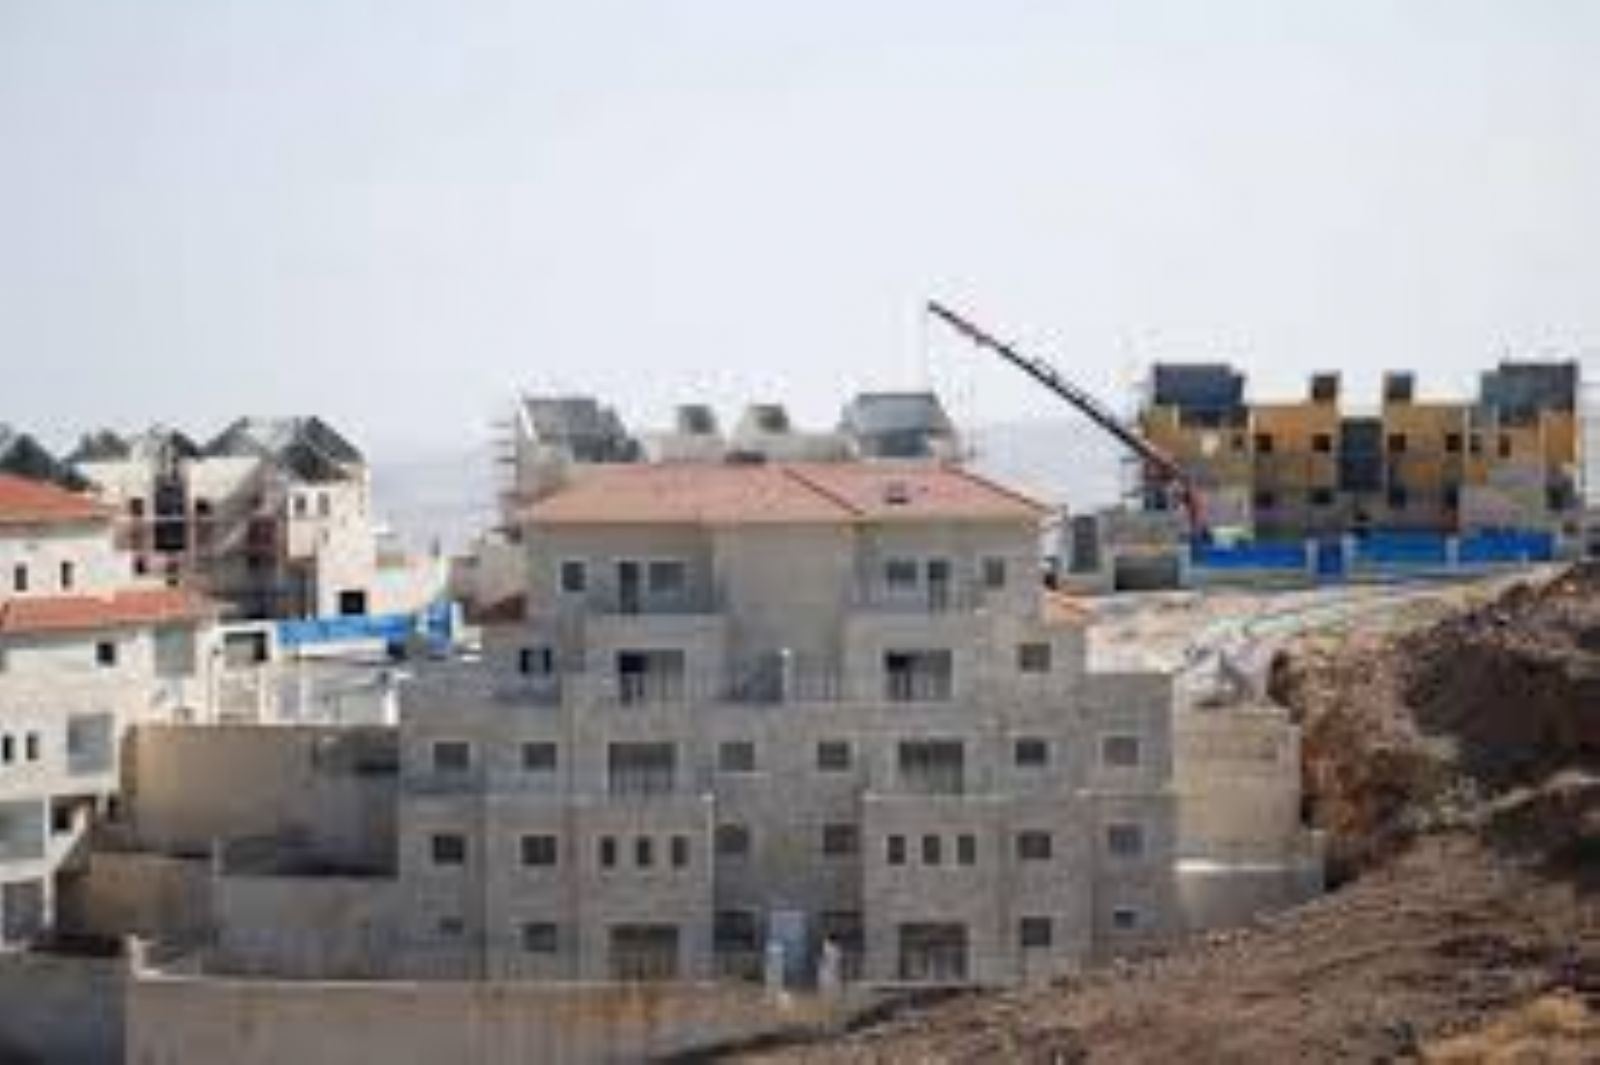 New data: 435,708 Israeli settlers live in occupied West Bank